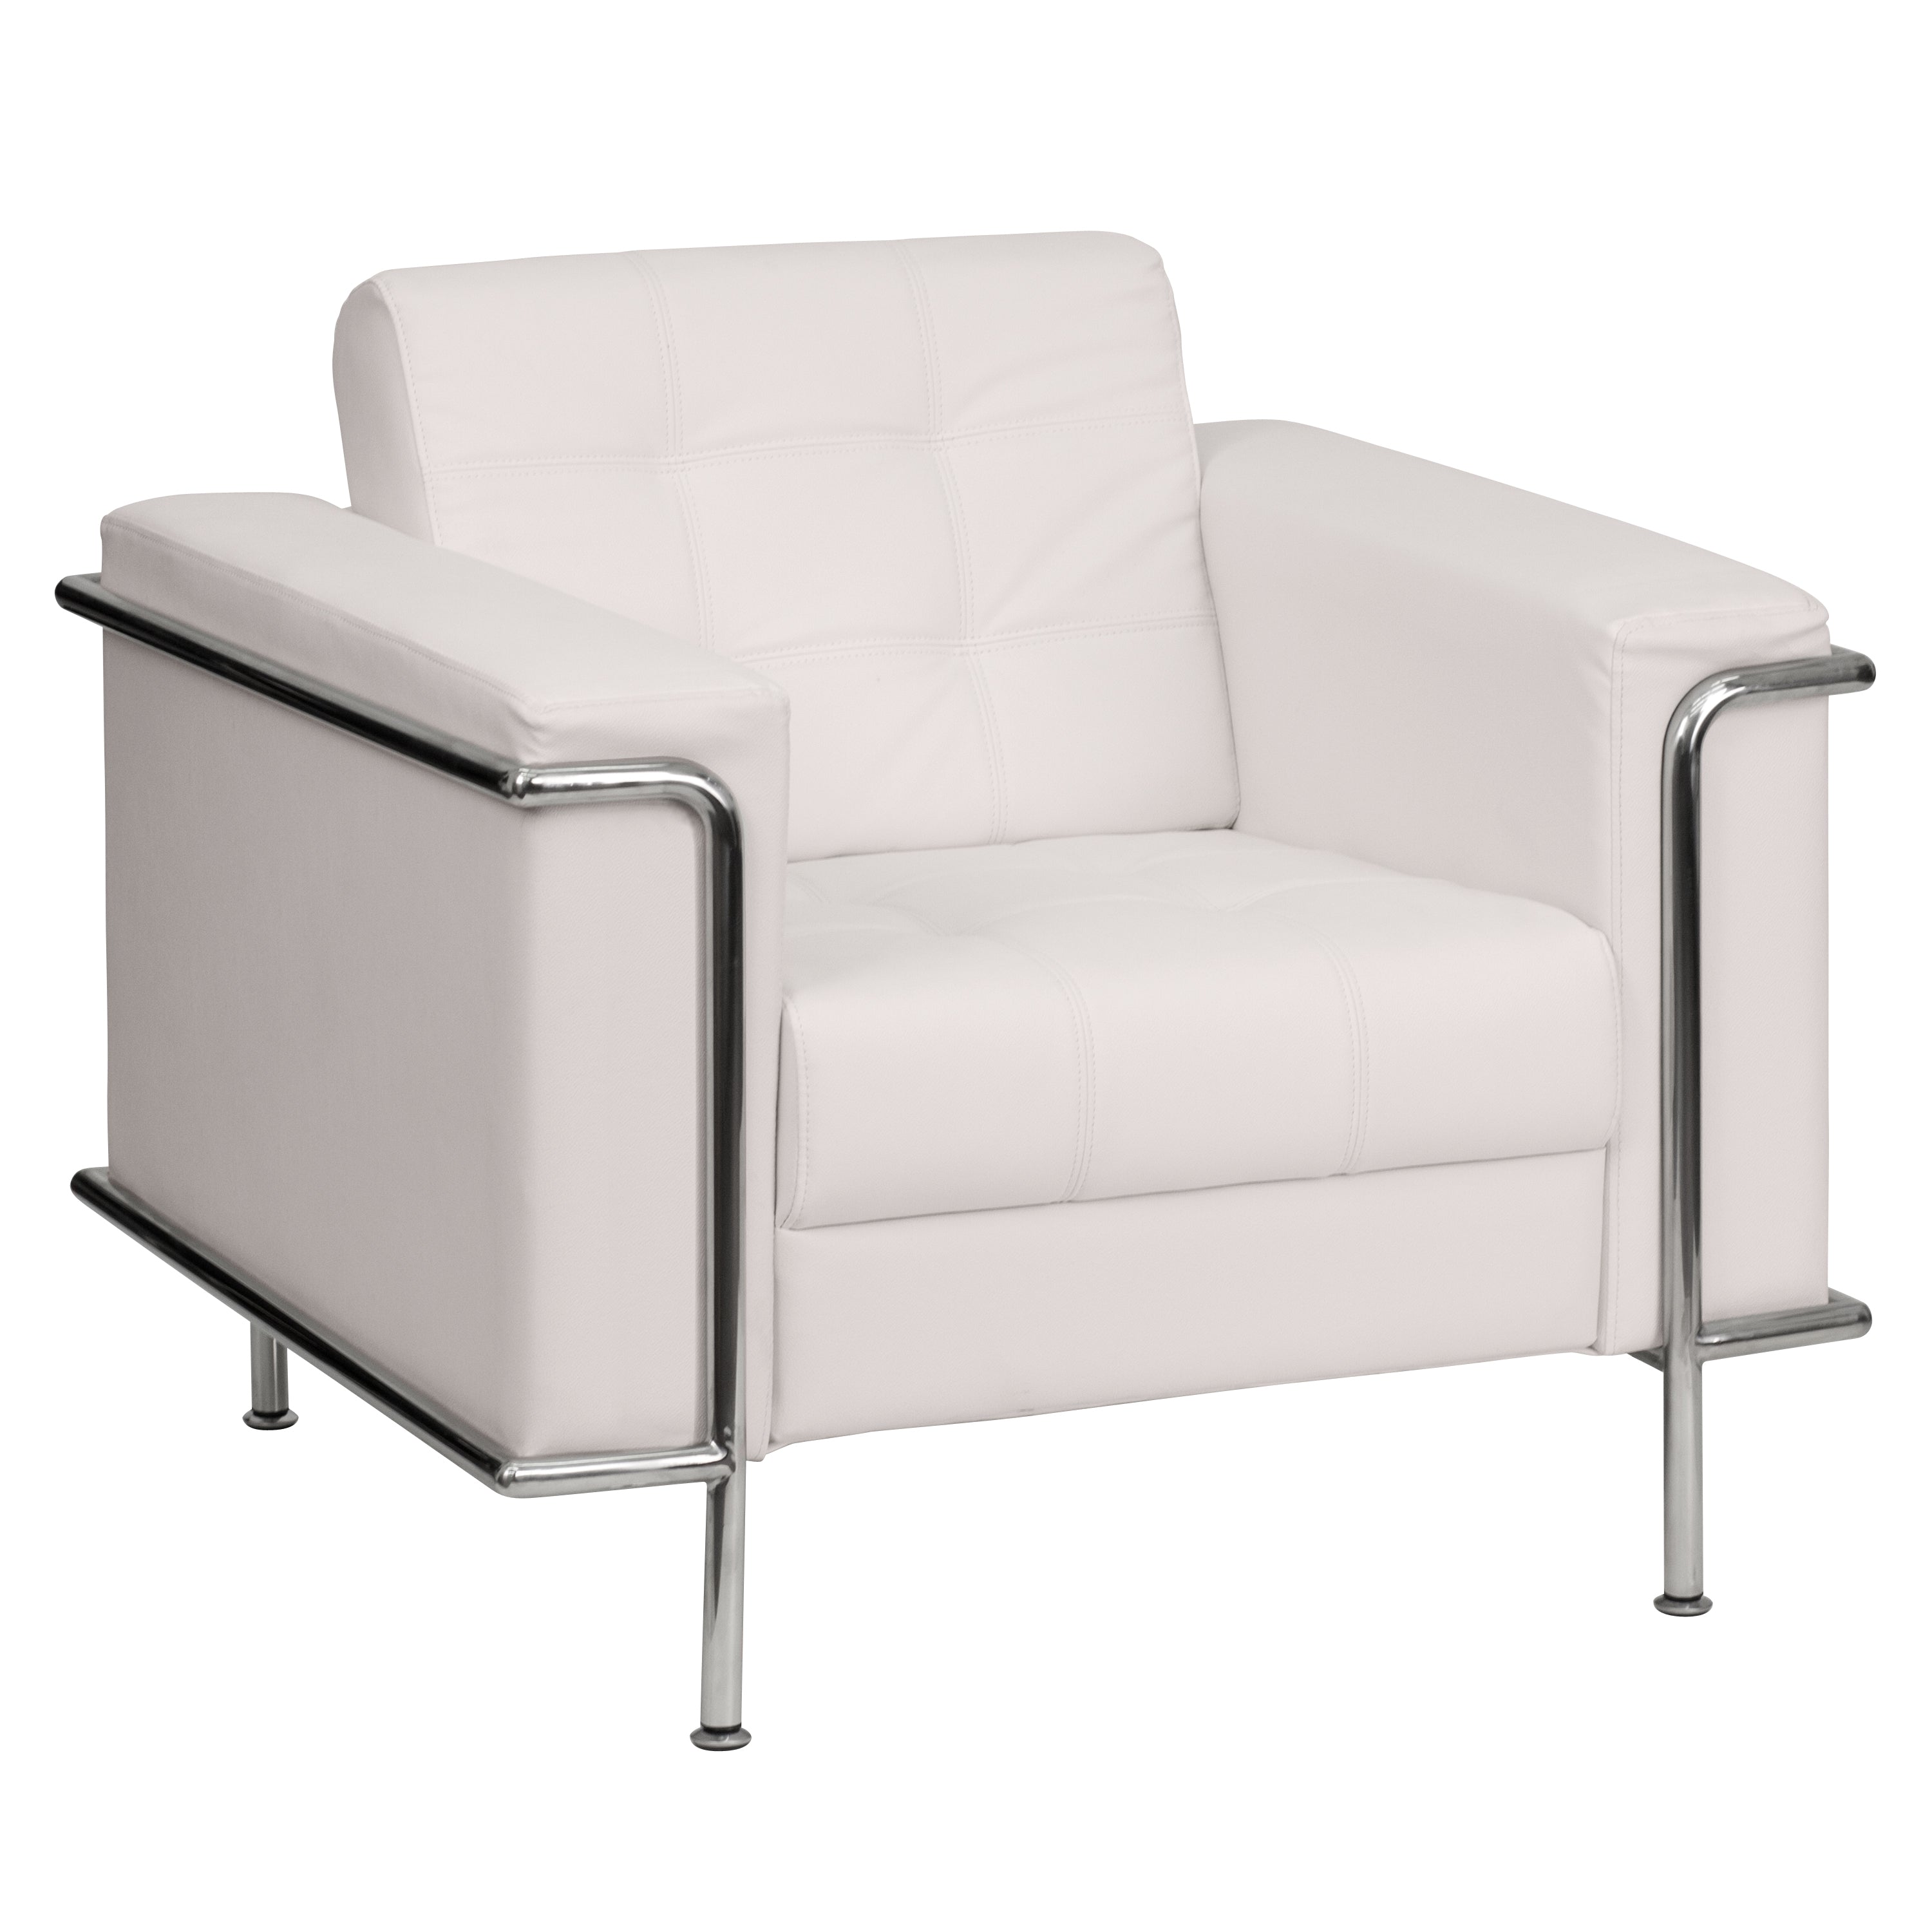 HERCULES Lesley Series Contemporary LeatherSoft Double Stitch Detail Chair with Encasing Frame-Reception Chair-Flash Furniture-Wall2Wall Furnishings